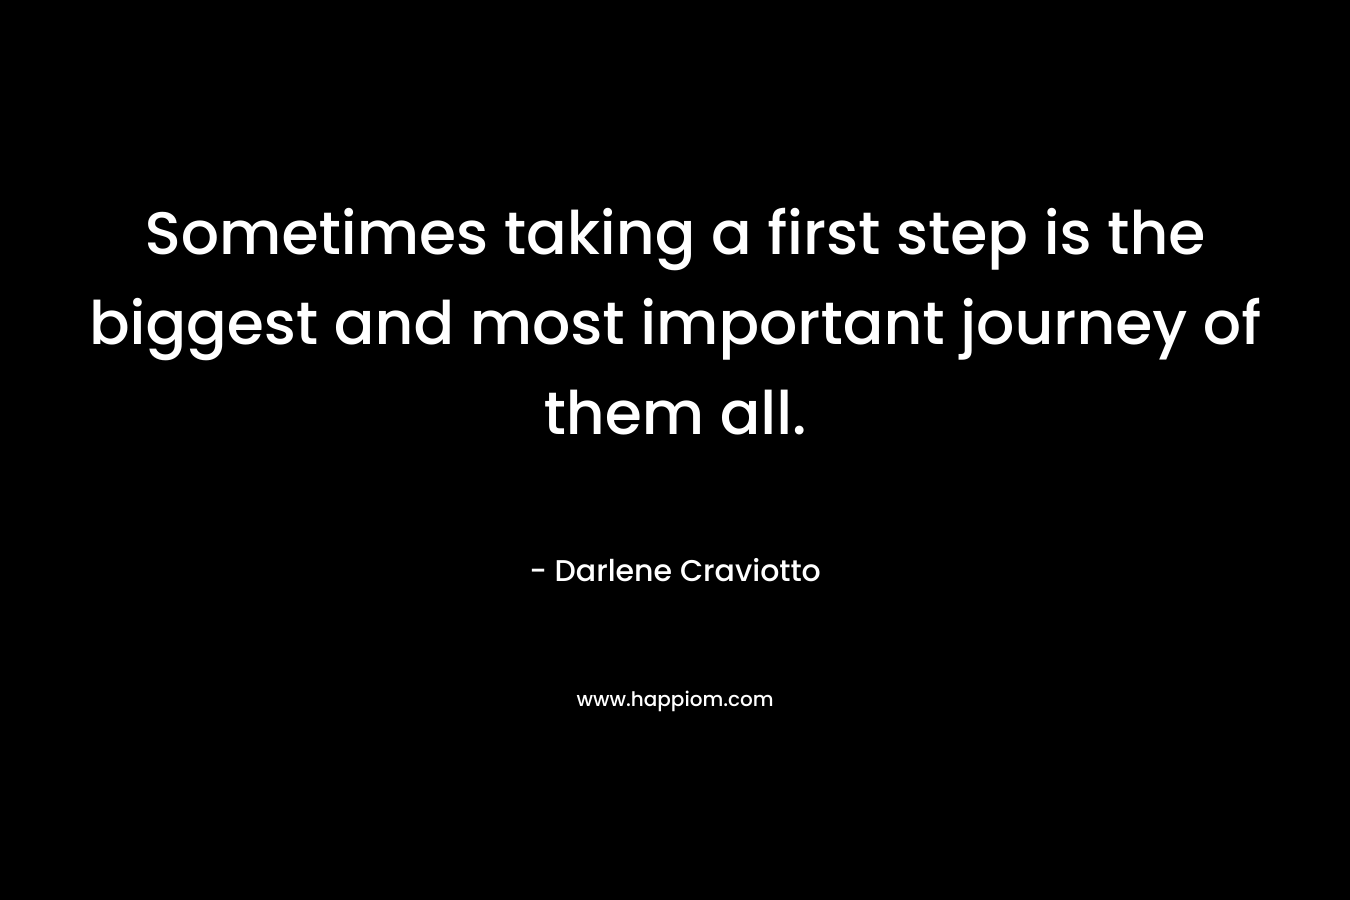 Sometimes taking a first step is the biggest and most important journey of them all.